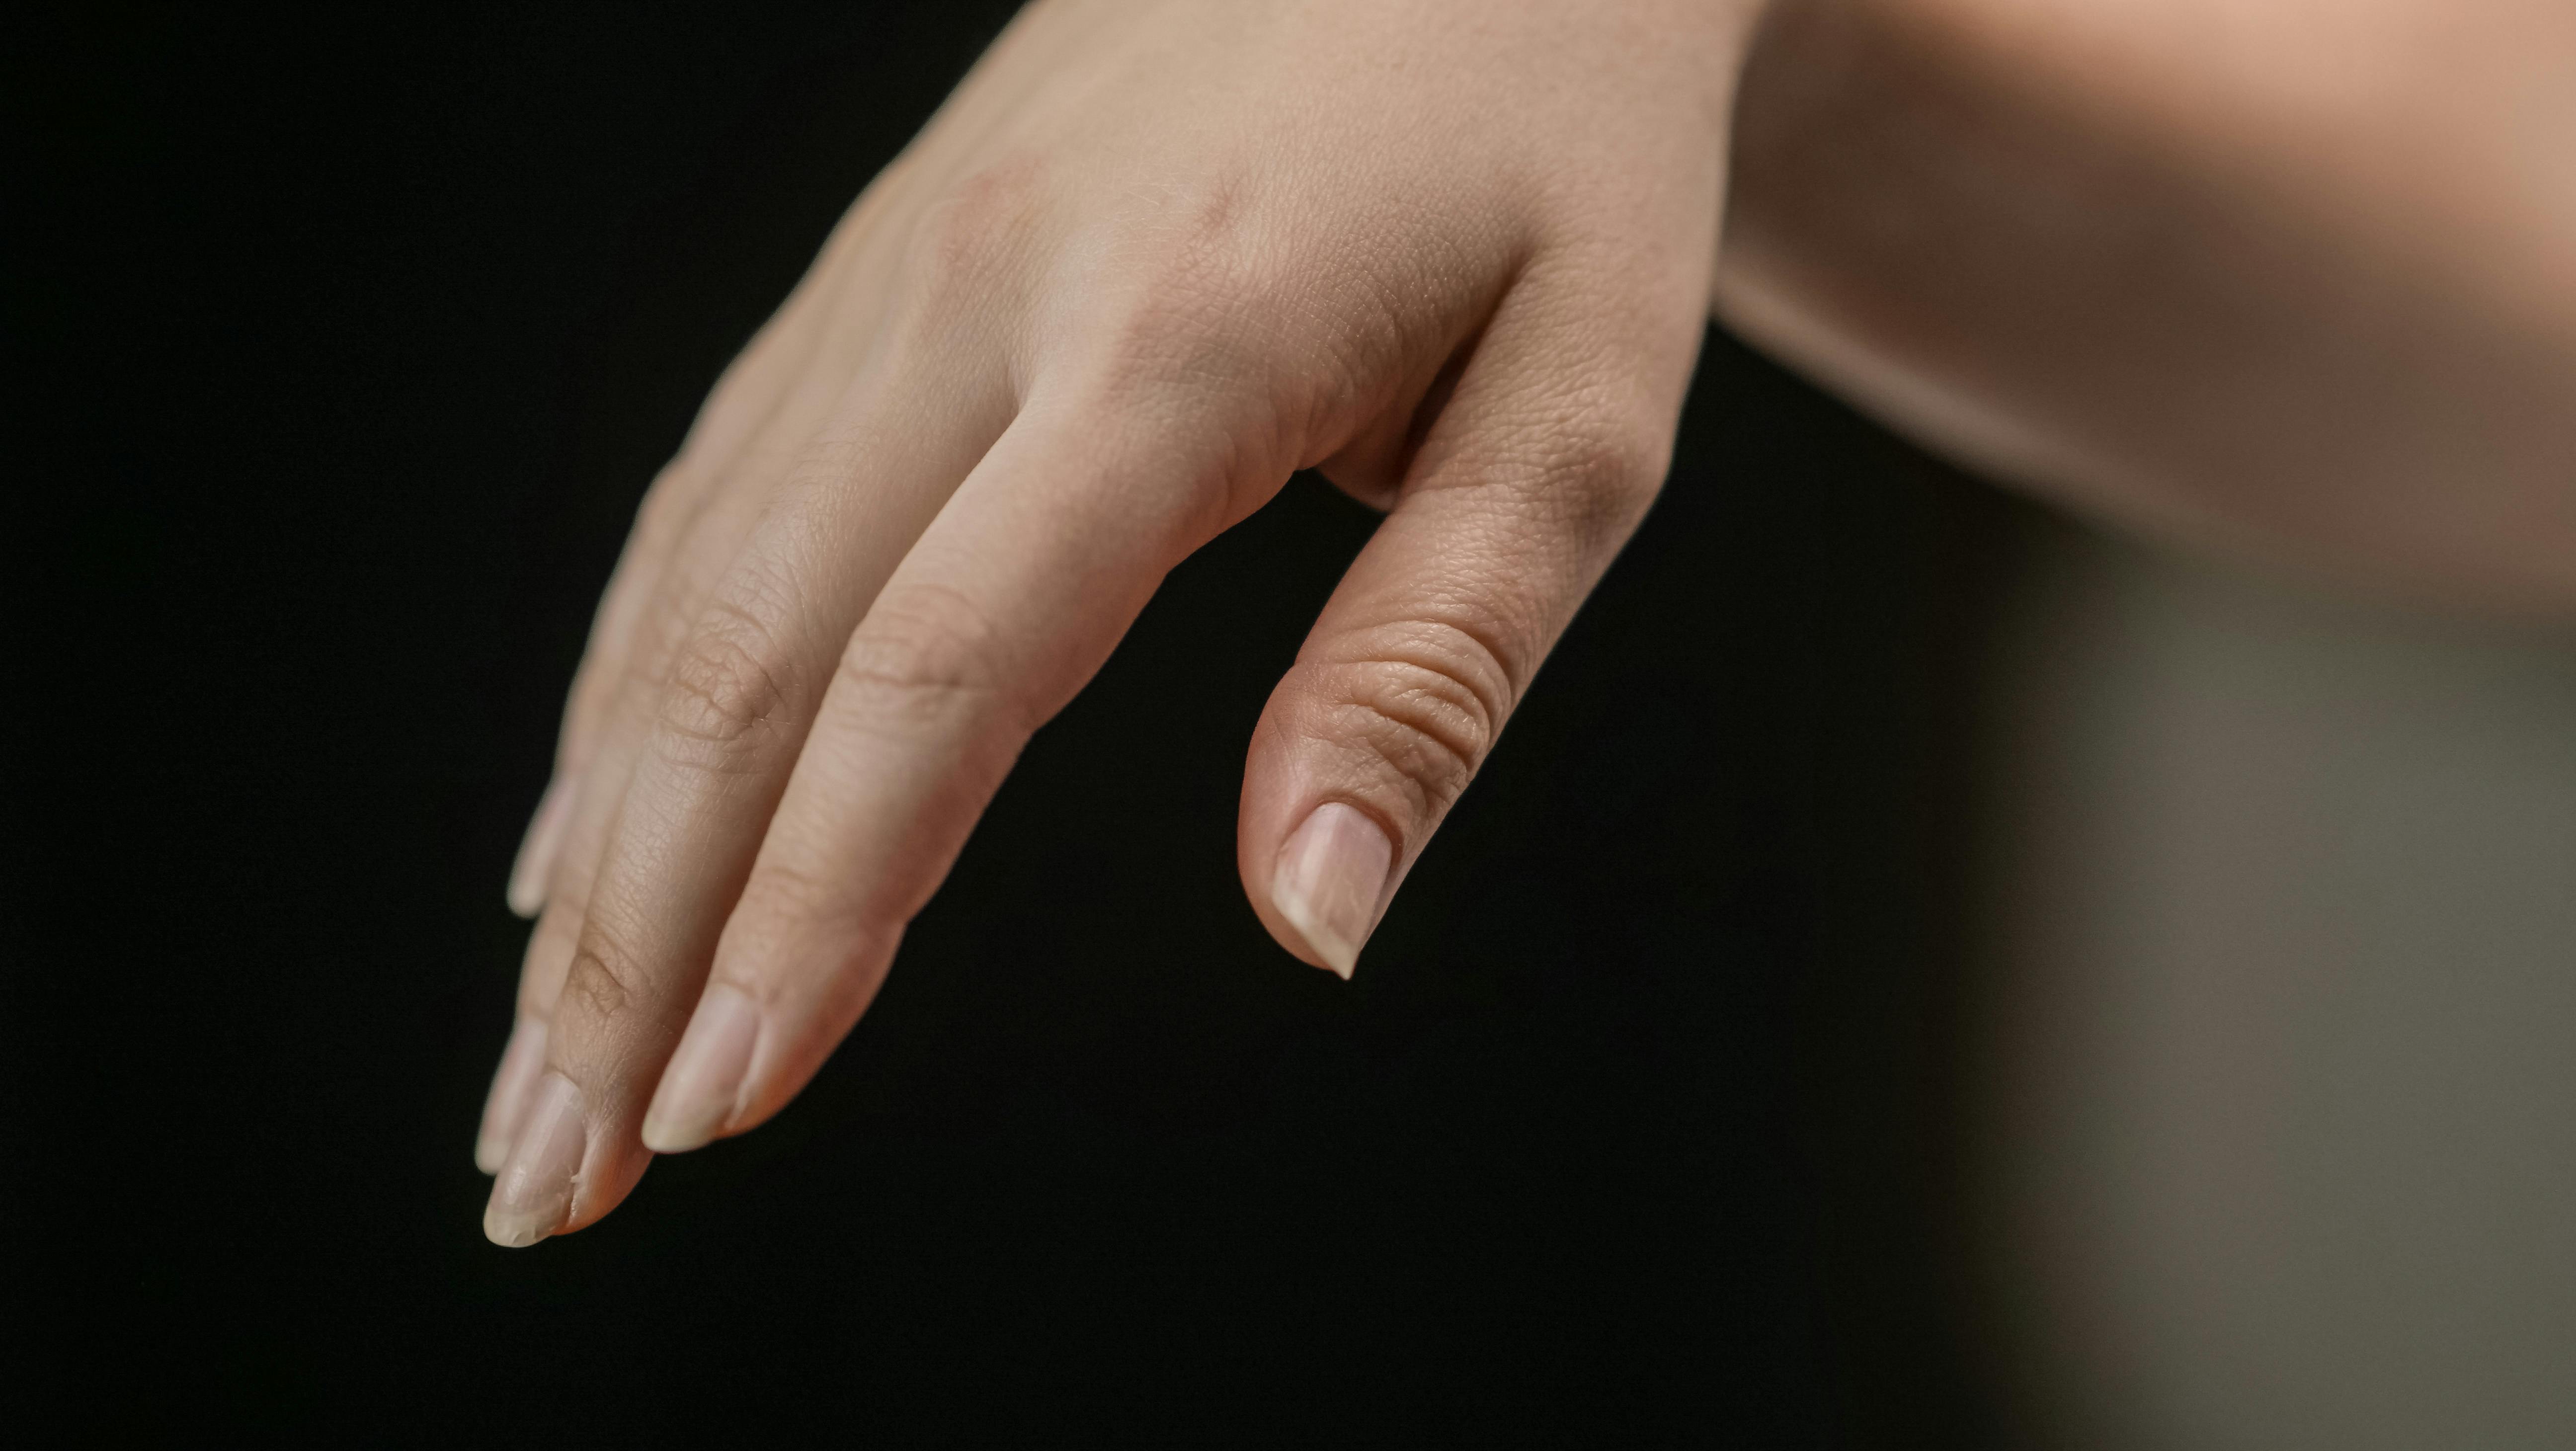 Let's make pharma easy - #Paronychia — Acute paronychia is a bacterial  infection of the lateral nail fold characterized by erythema, swelling, and  tenderness along the nail fold, especially in the dorsolateral